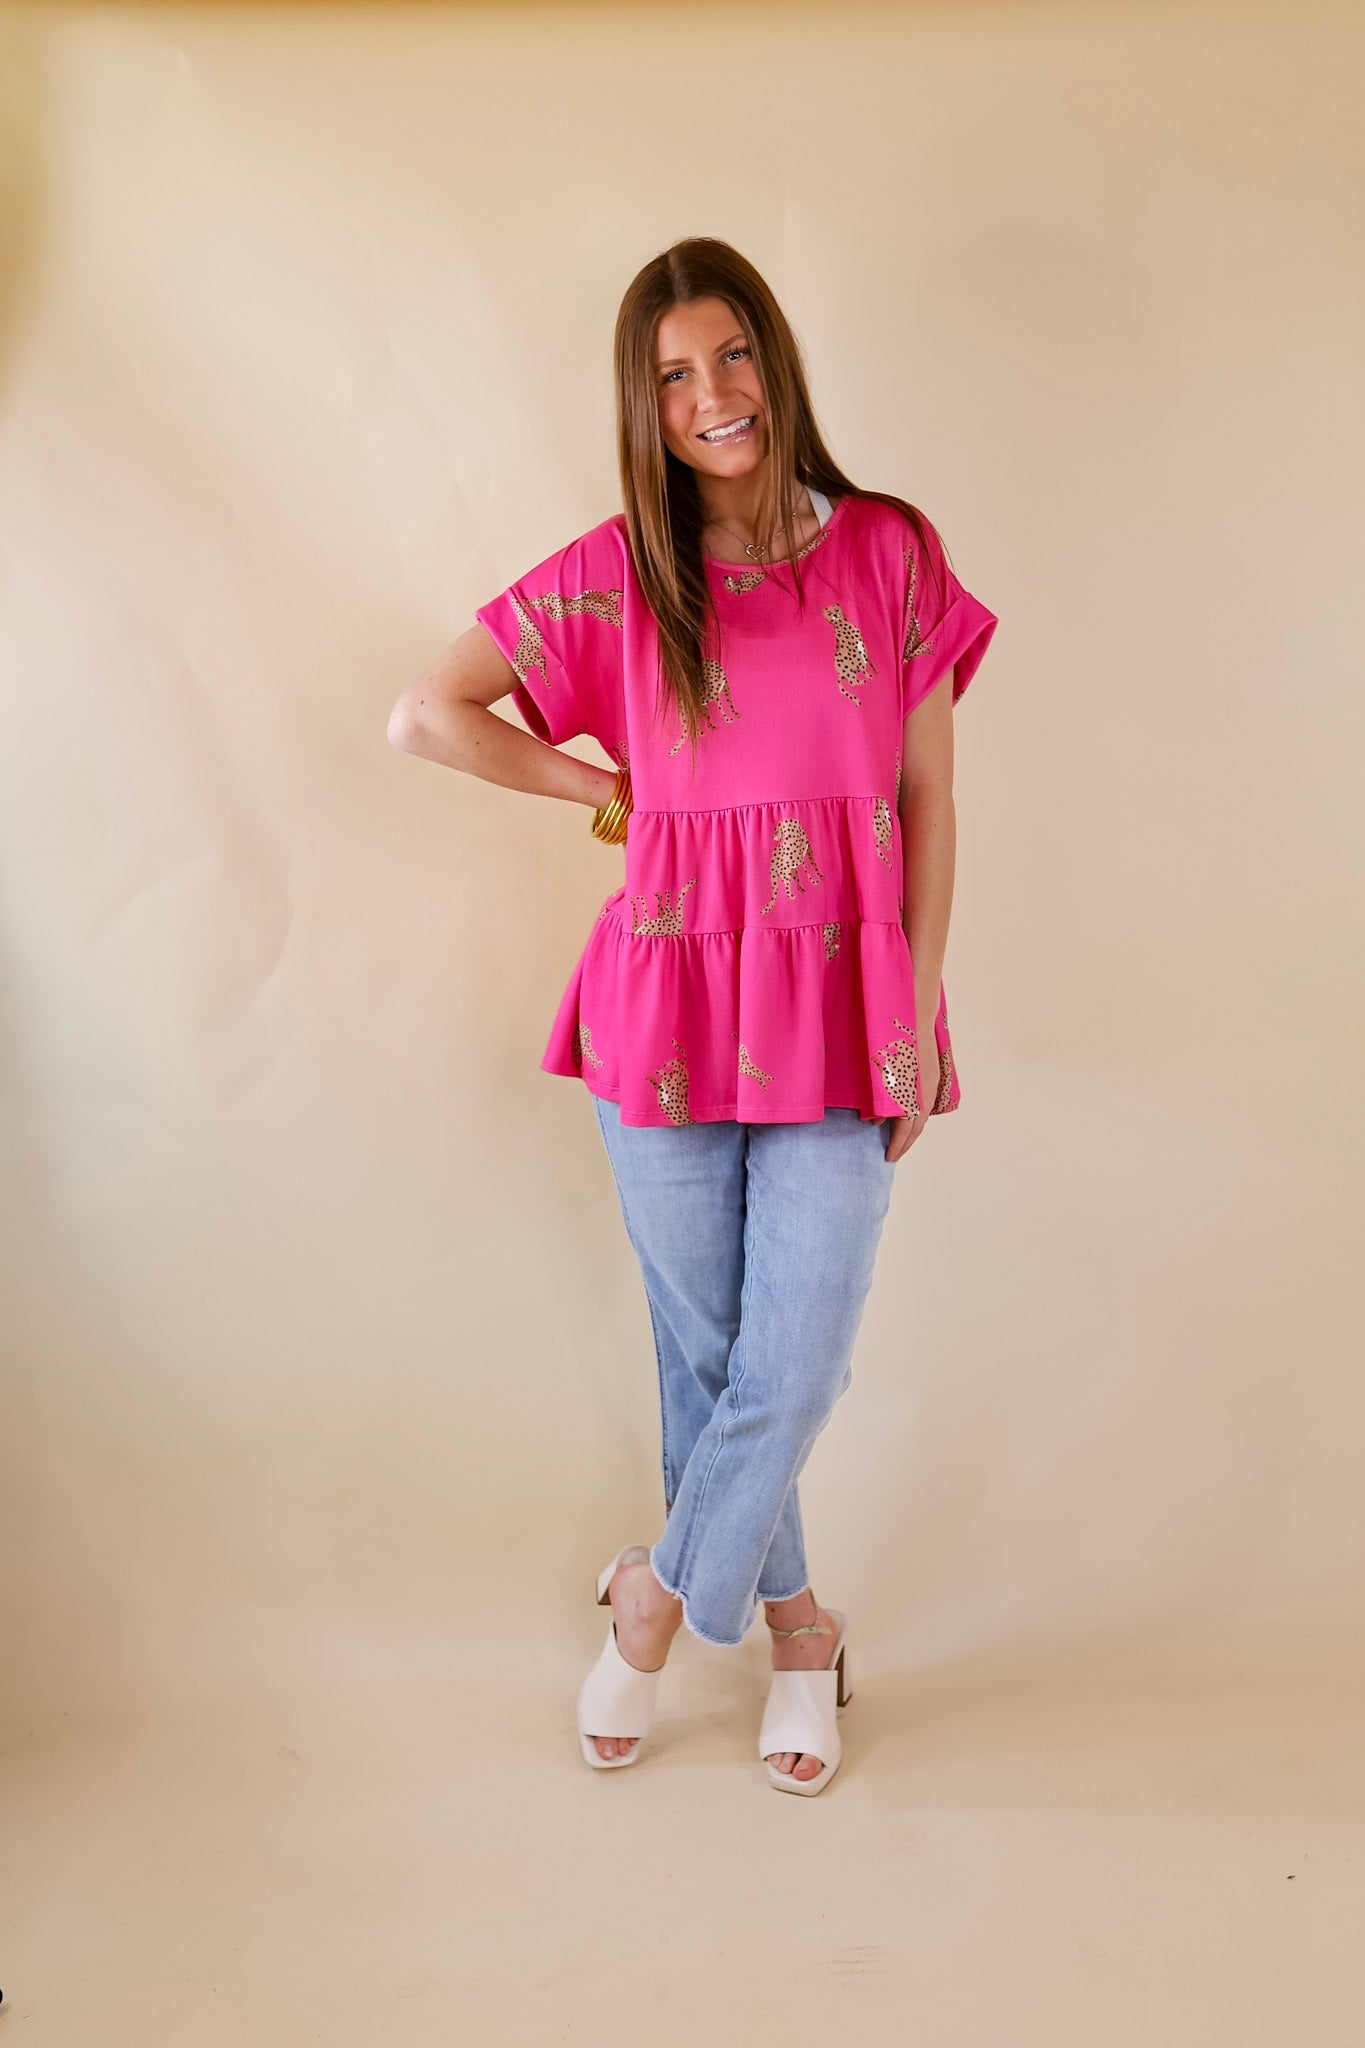 Feeling Wild Cheetah Print Tiered Babydoll Top in Hot Pink - Giddy Up Glamour Boutique